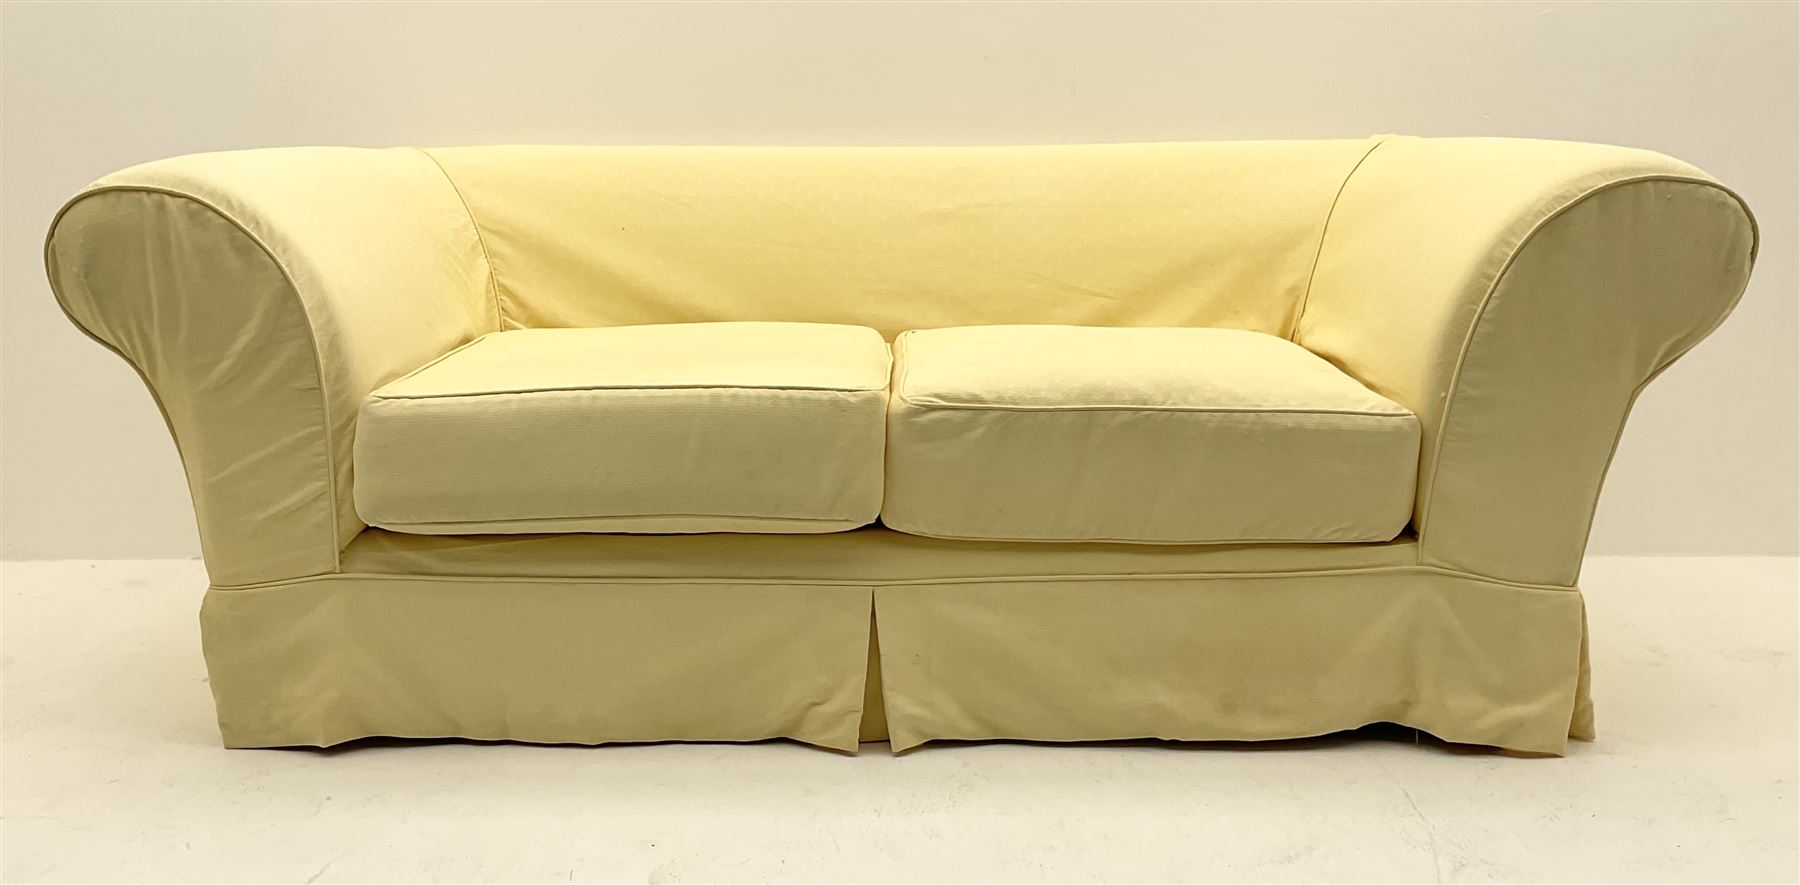 Pair traditional two seat sofas upholstered in pale yellow cover